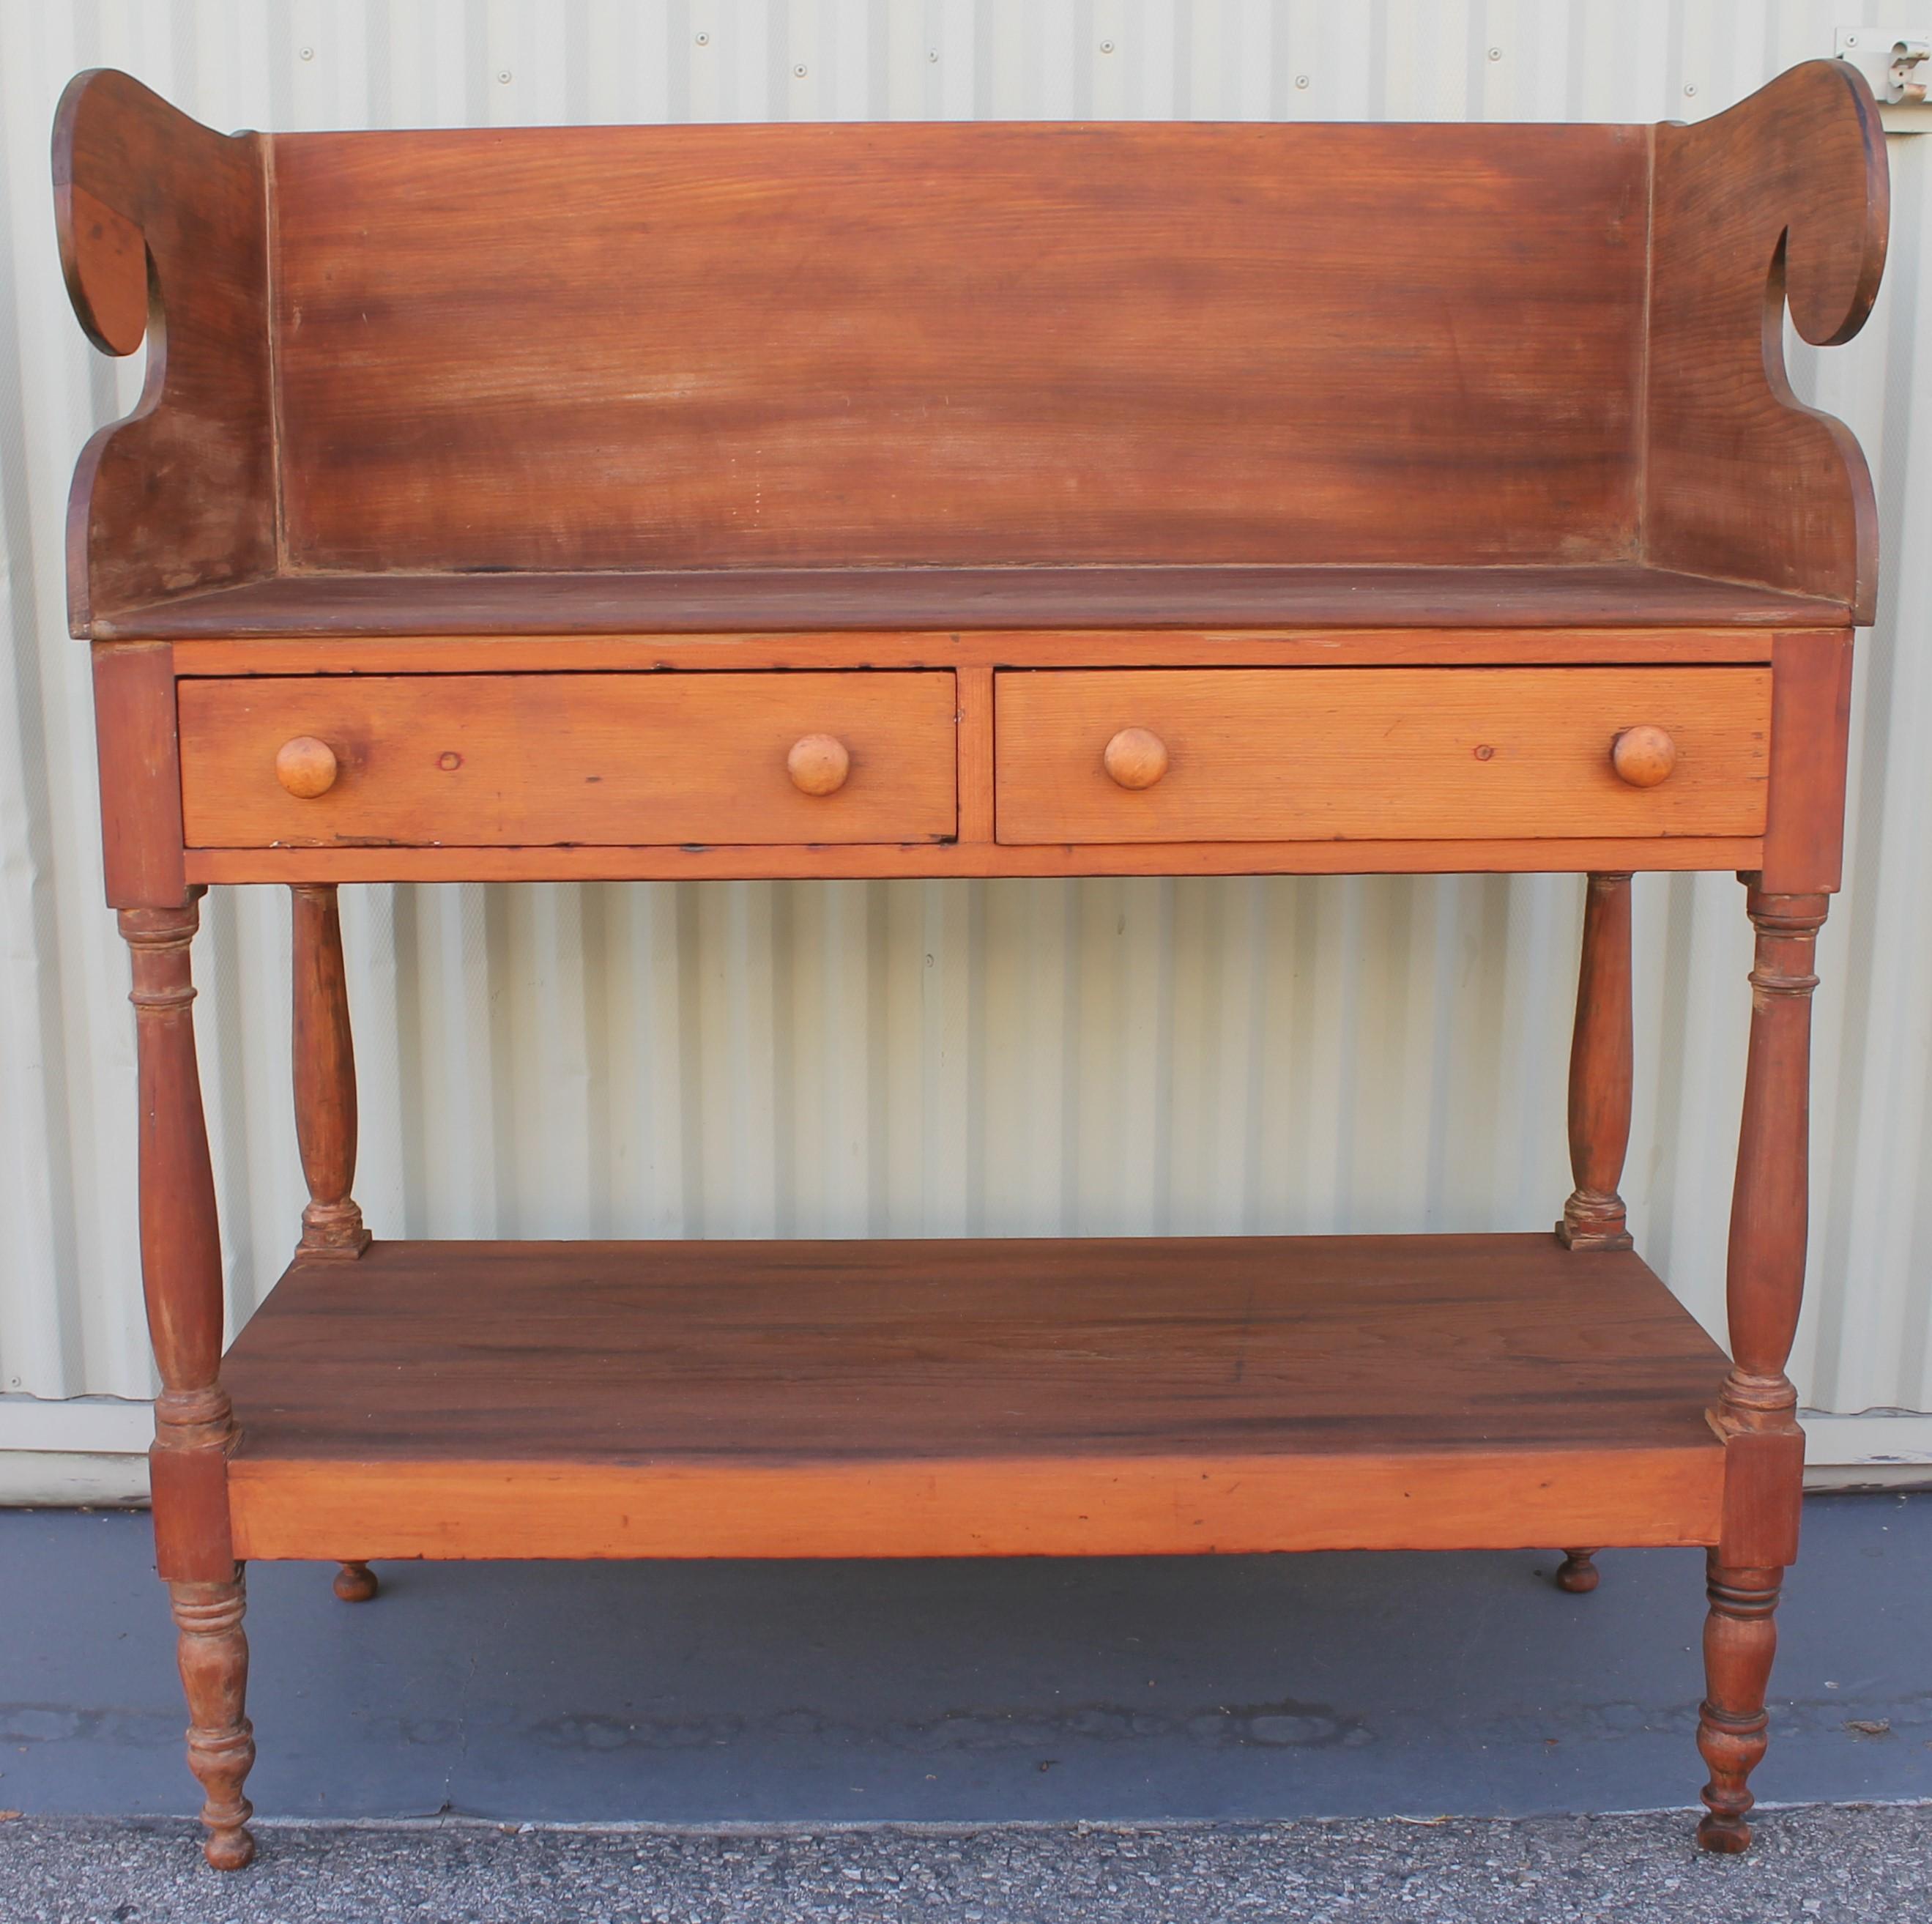 Country 19th Century Console Table with Drawers from Pennsylvania